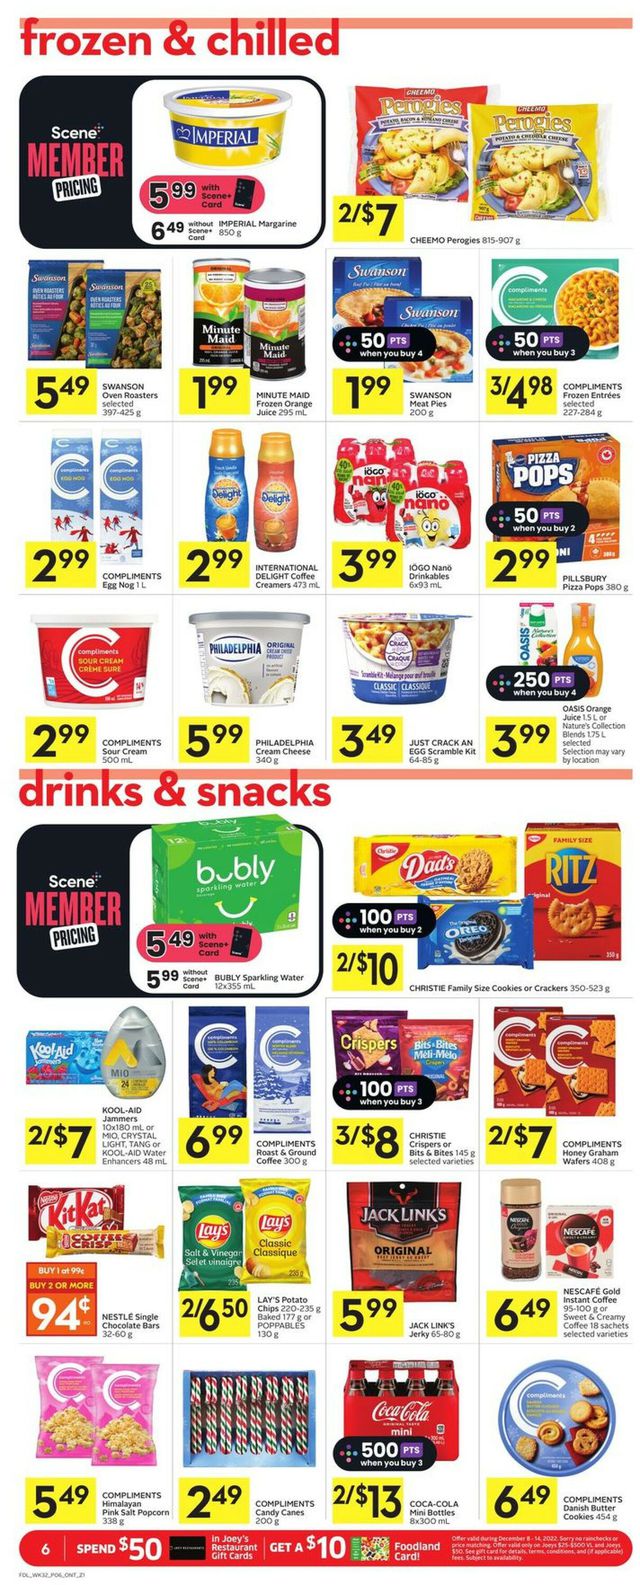 Foodland Flyer from 12/08/2022